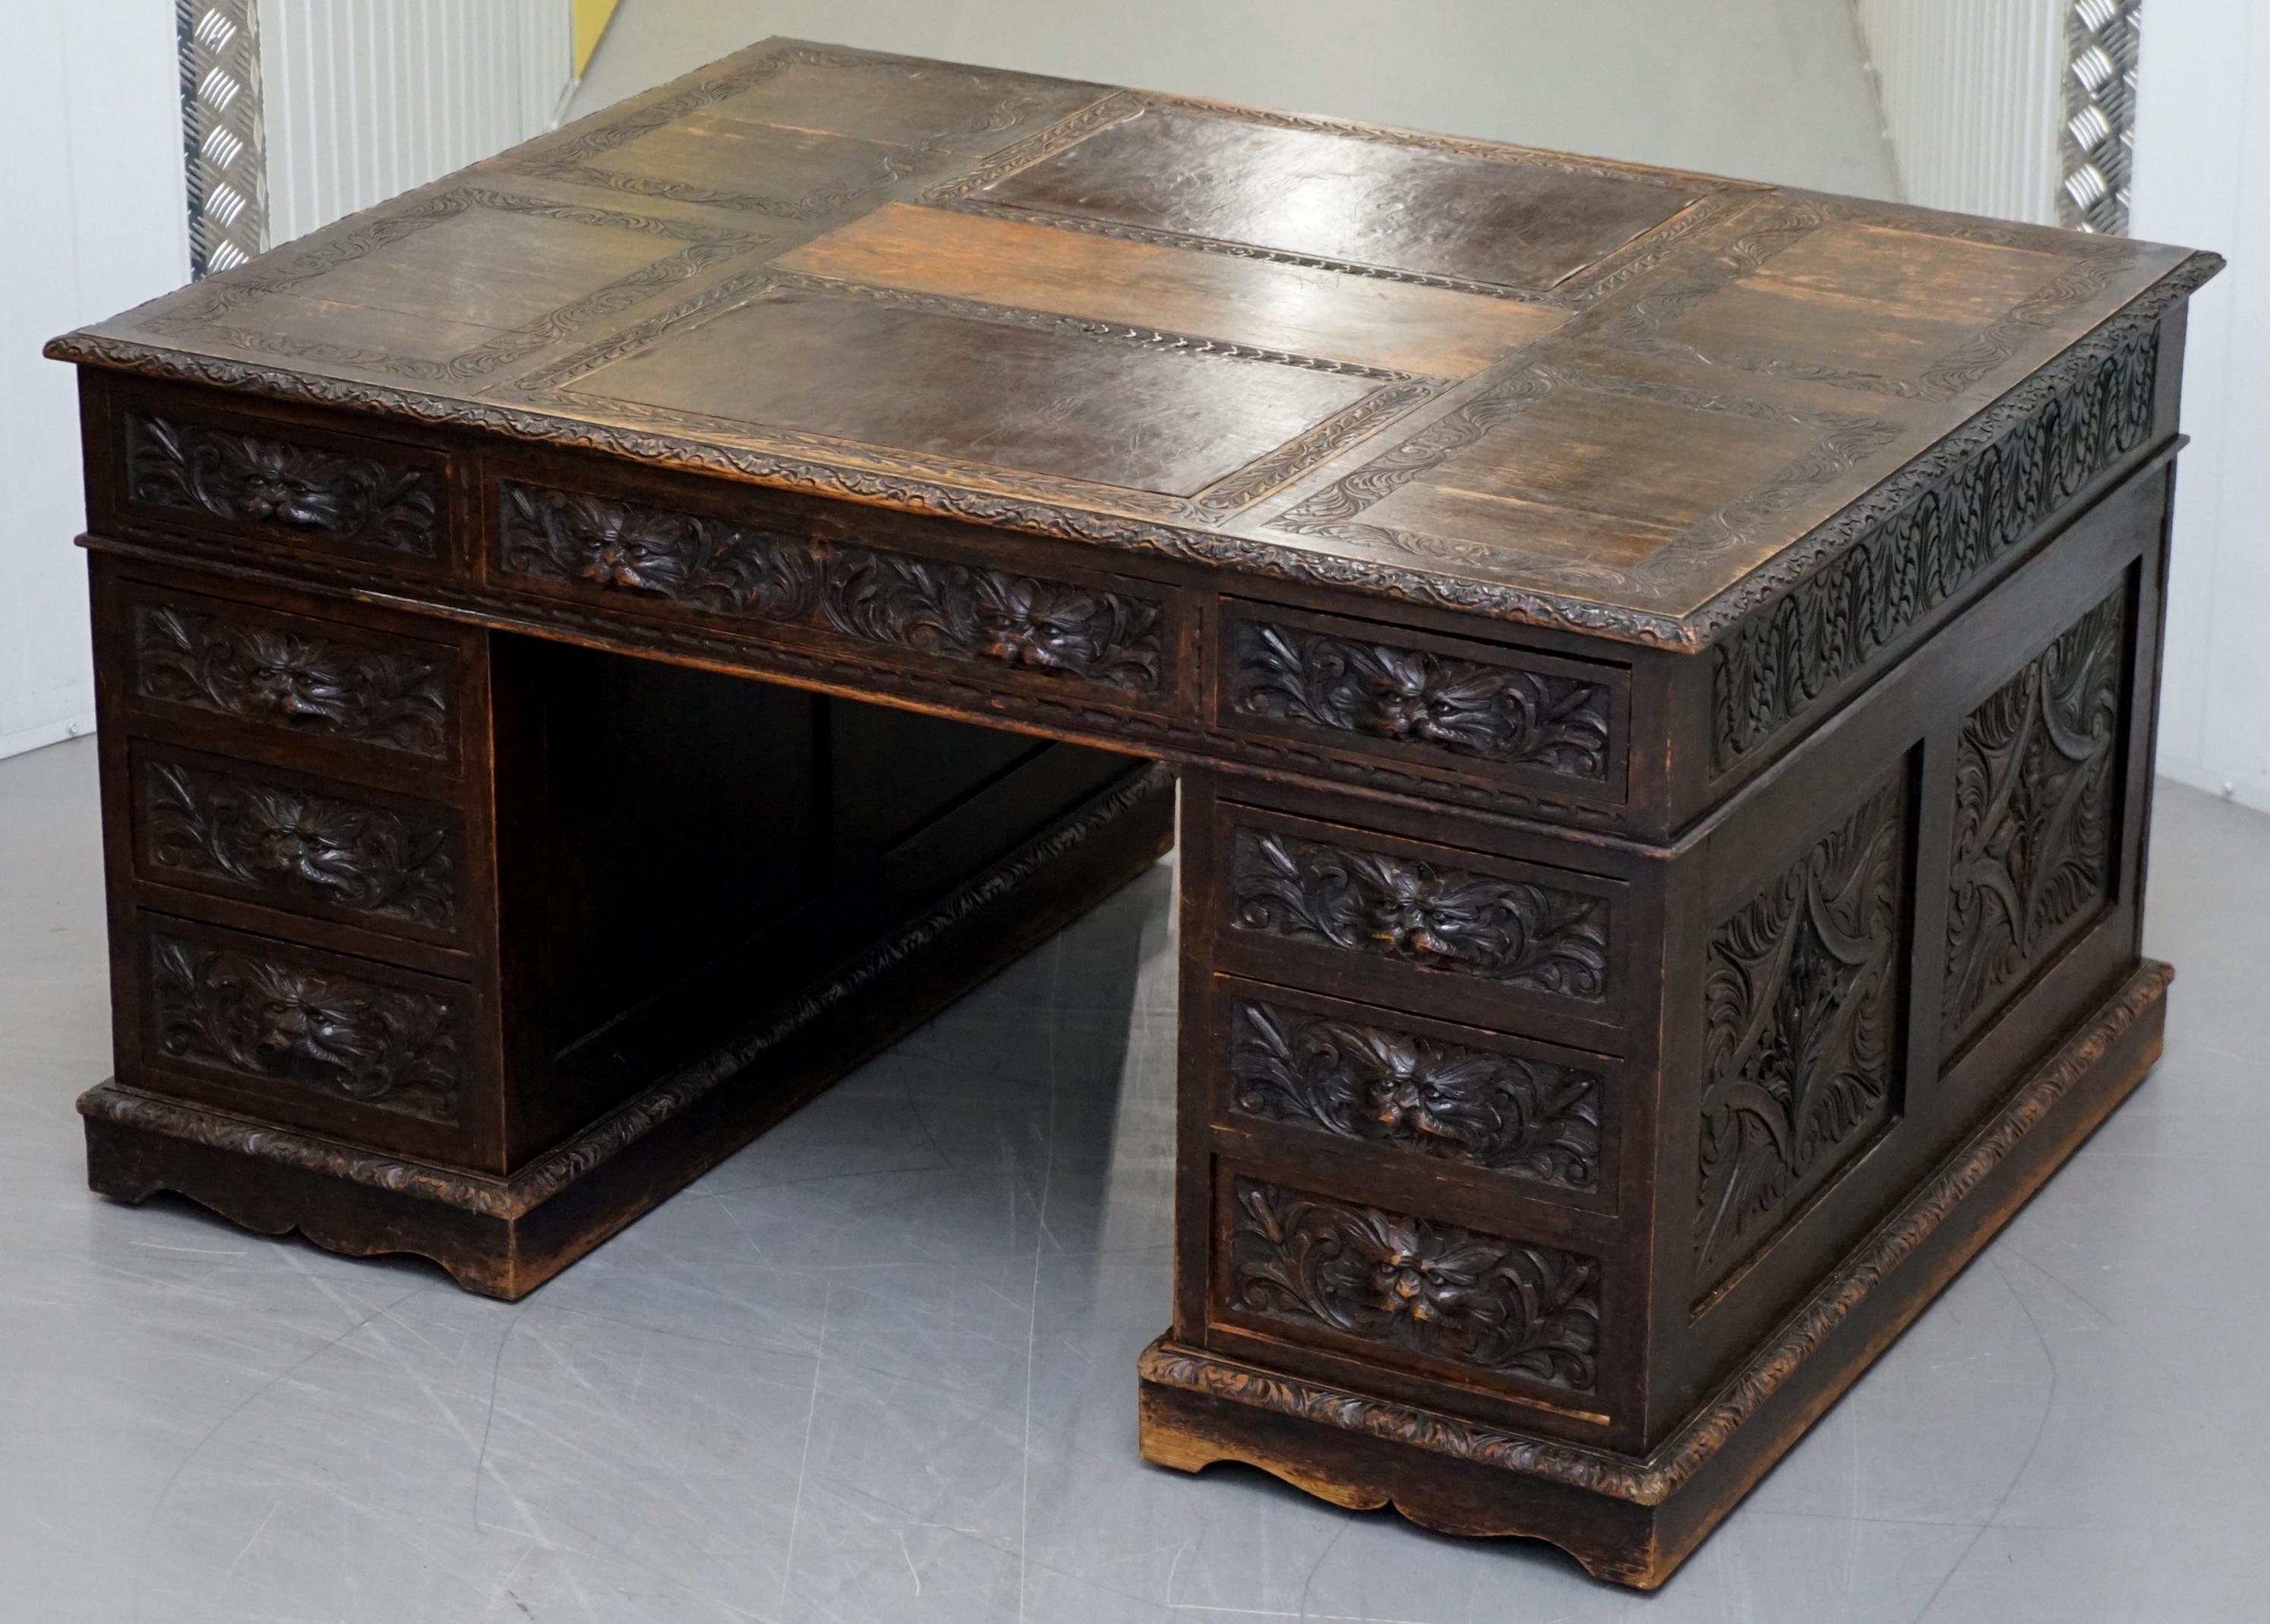 Wimbledon-Furniture is delighted to offer for sale this lovely hand carved Green Man style Edwardian Oak double sided 12 drawer 2 cupboard partner desk

A very rare find, these desks pop up from time to time as single sided desks, I’ve never seen a